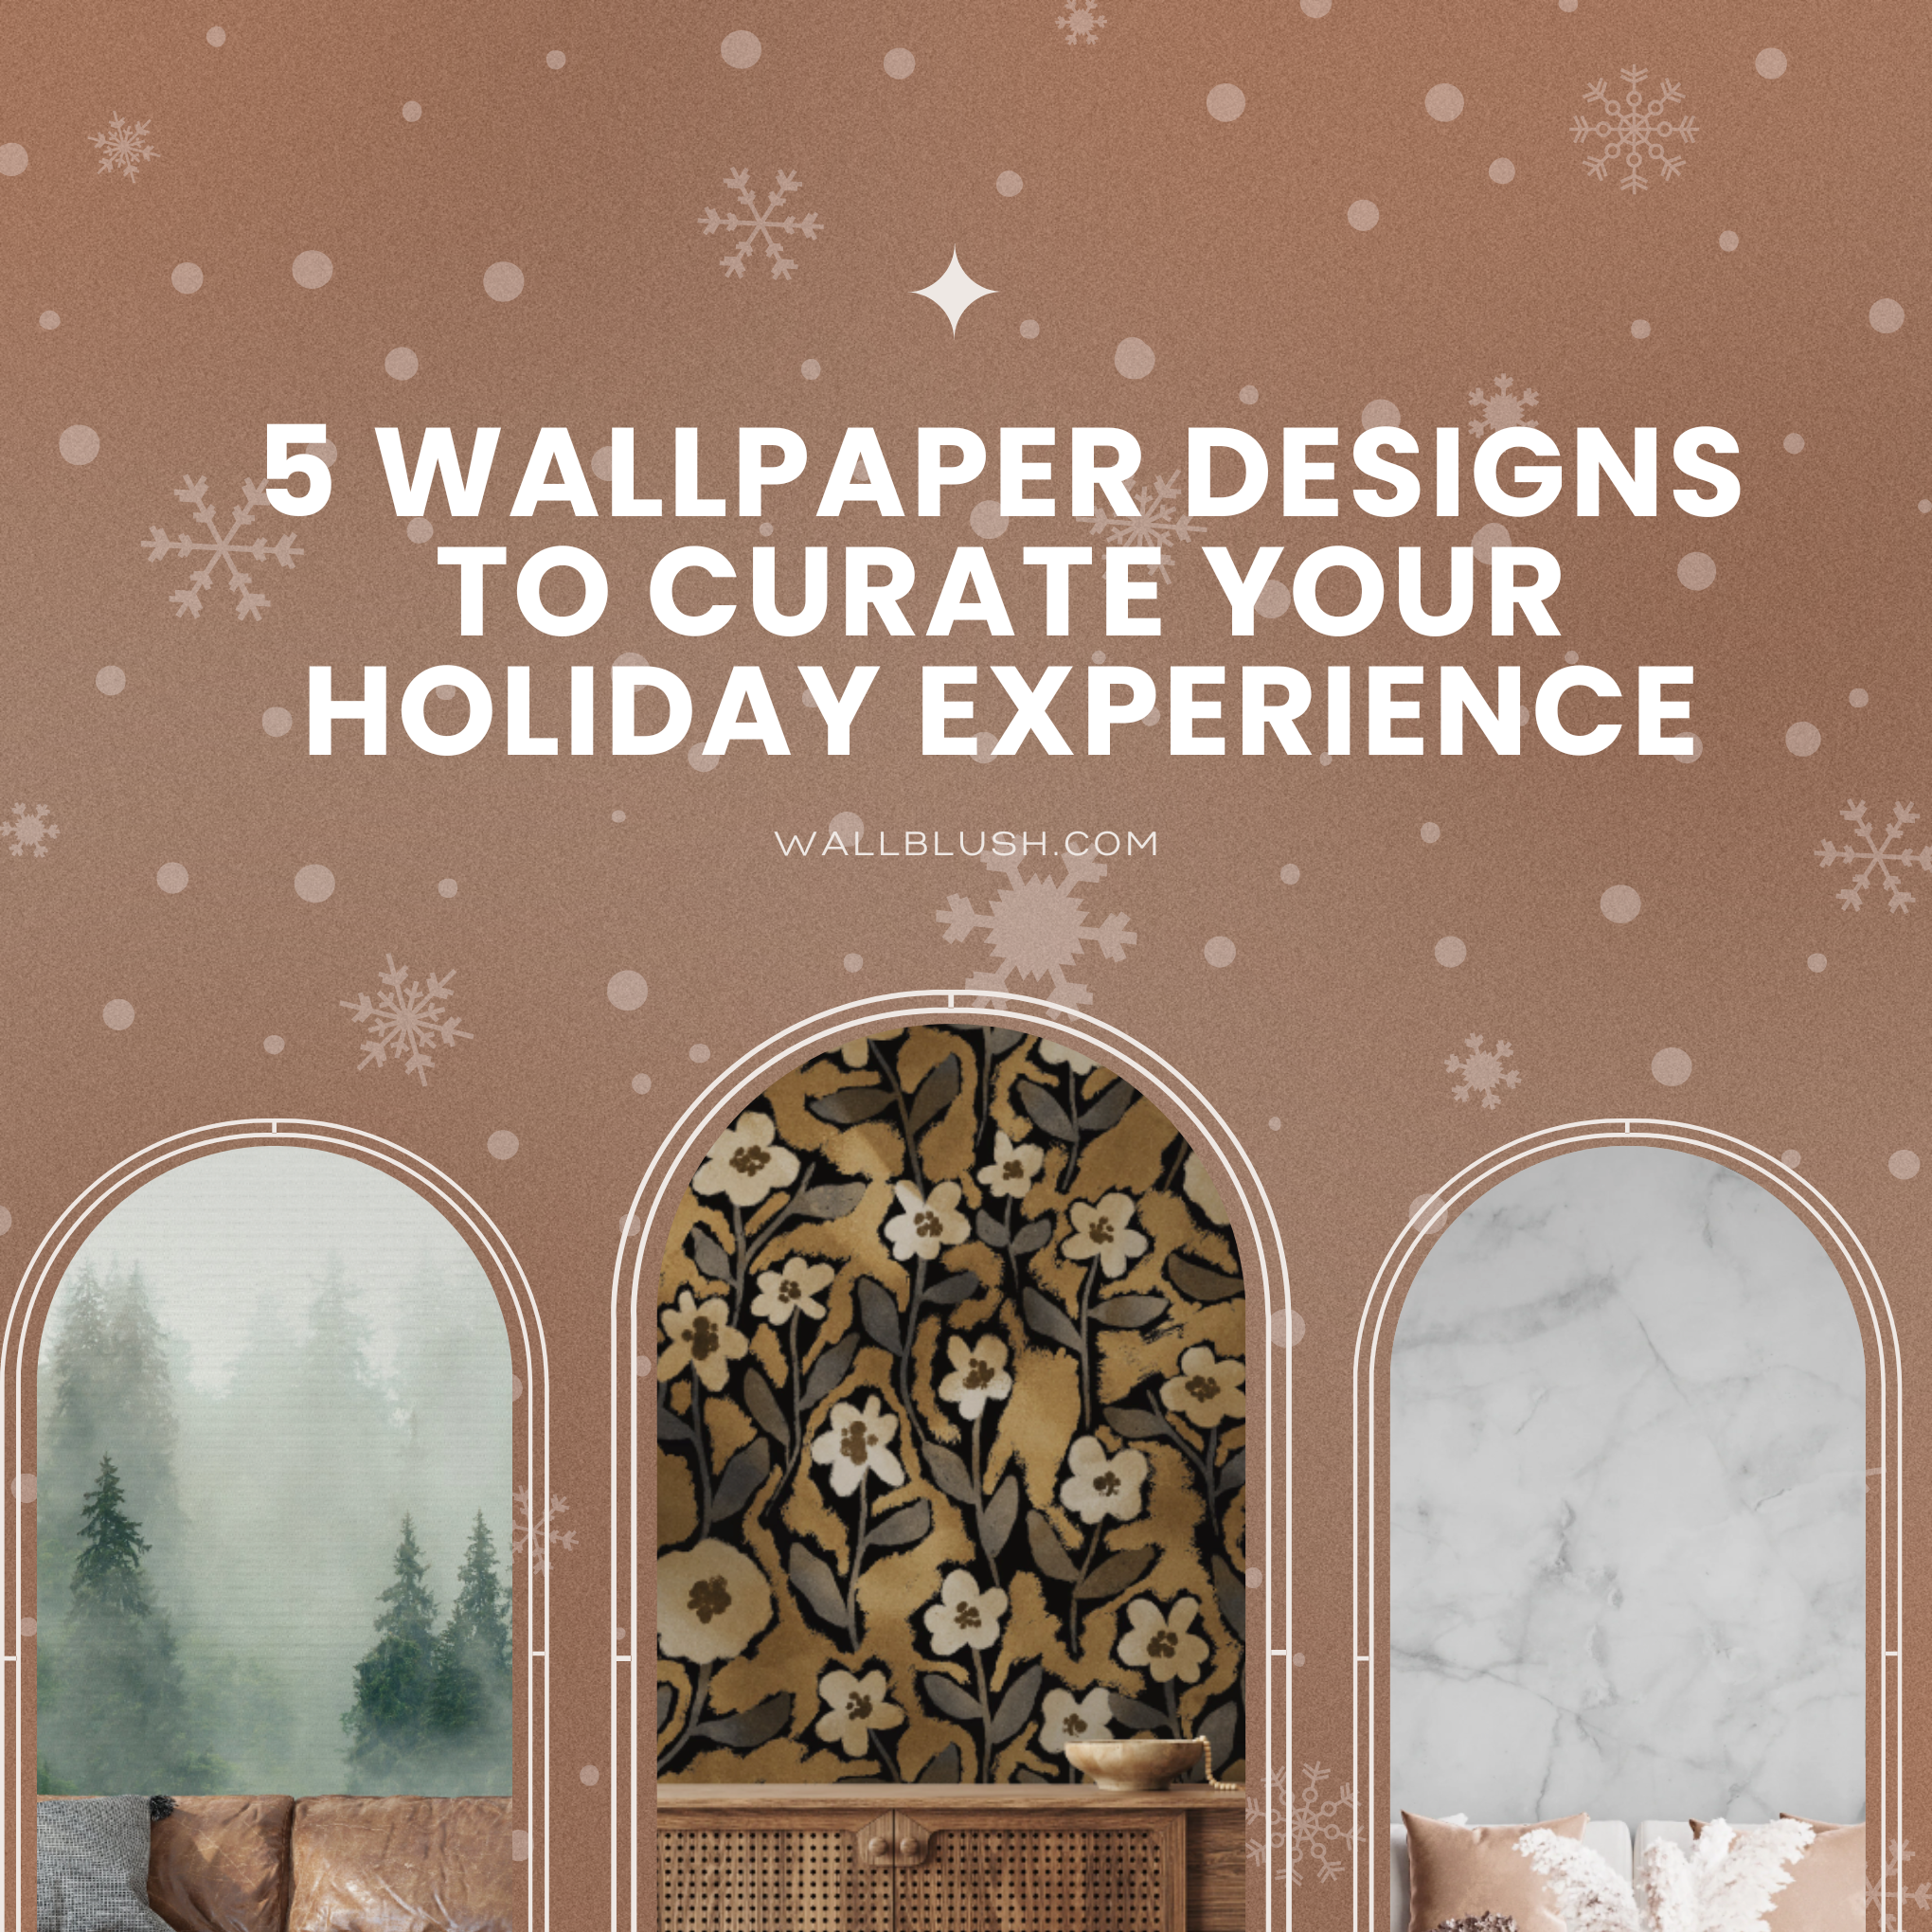 5 Wallpaper Designs to Curate Your Holiday Experience